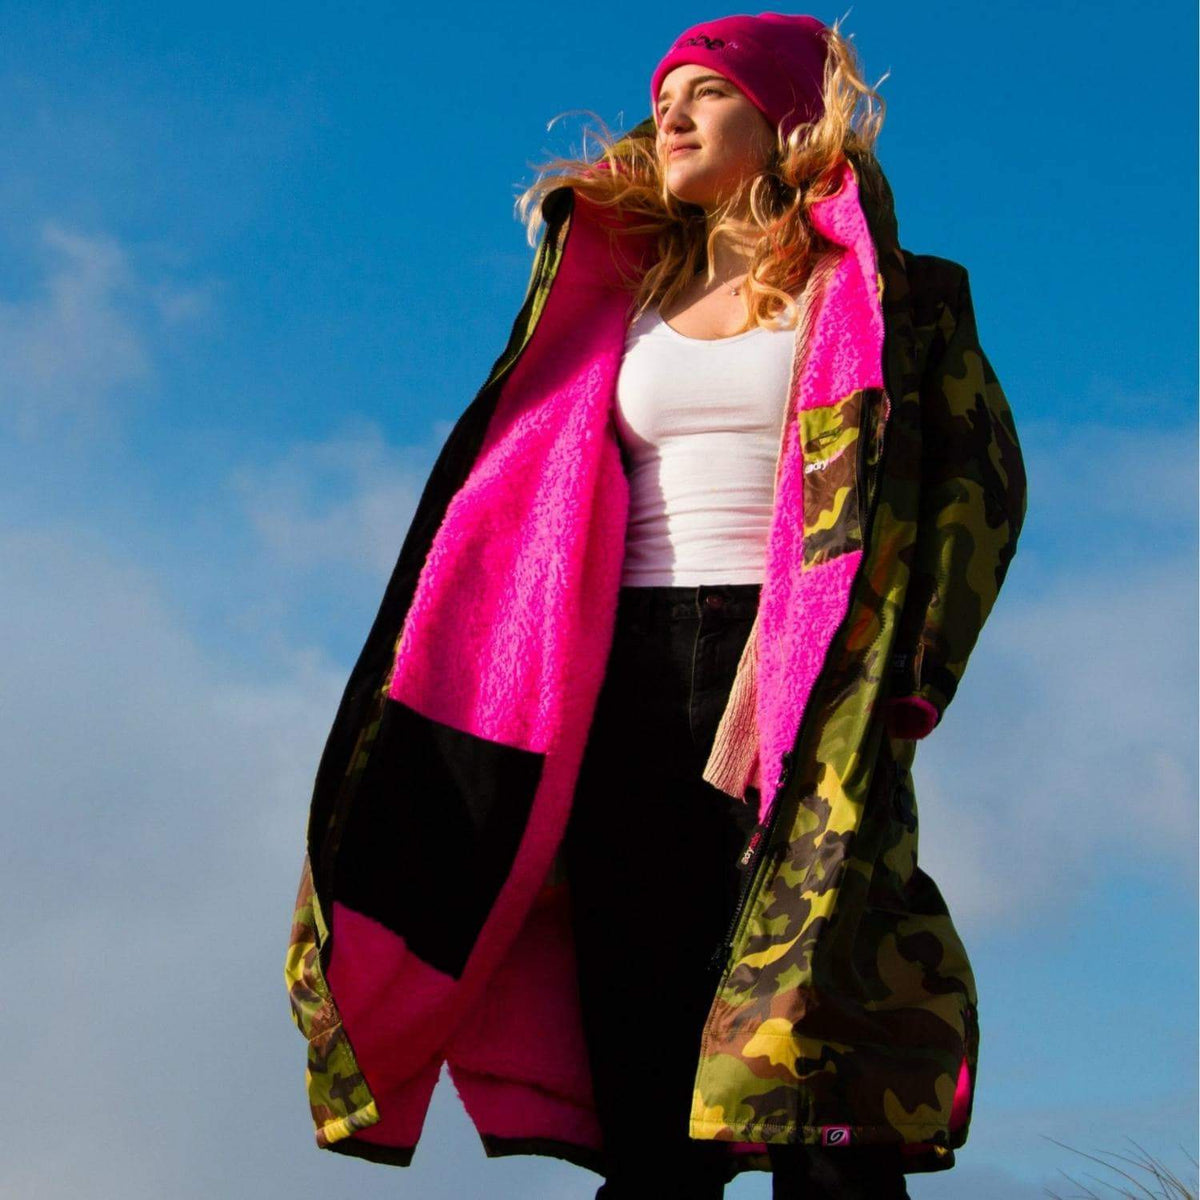 Dryrobe Advance Long Sleeve Drying &amp; Changing Robe - Camouflage/Pink - Changing Robe Poncho Towel by Dryrobe